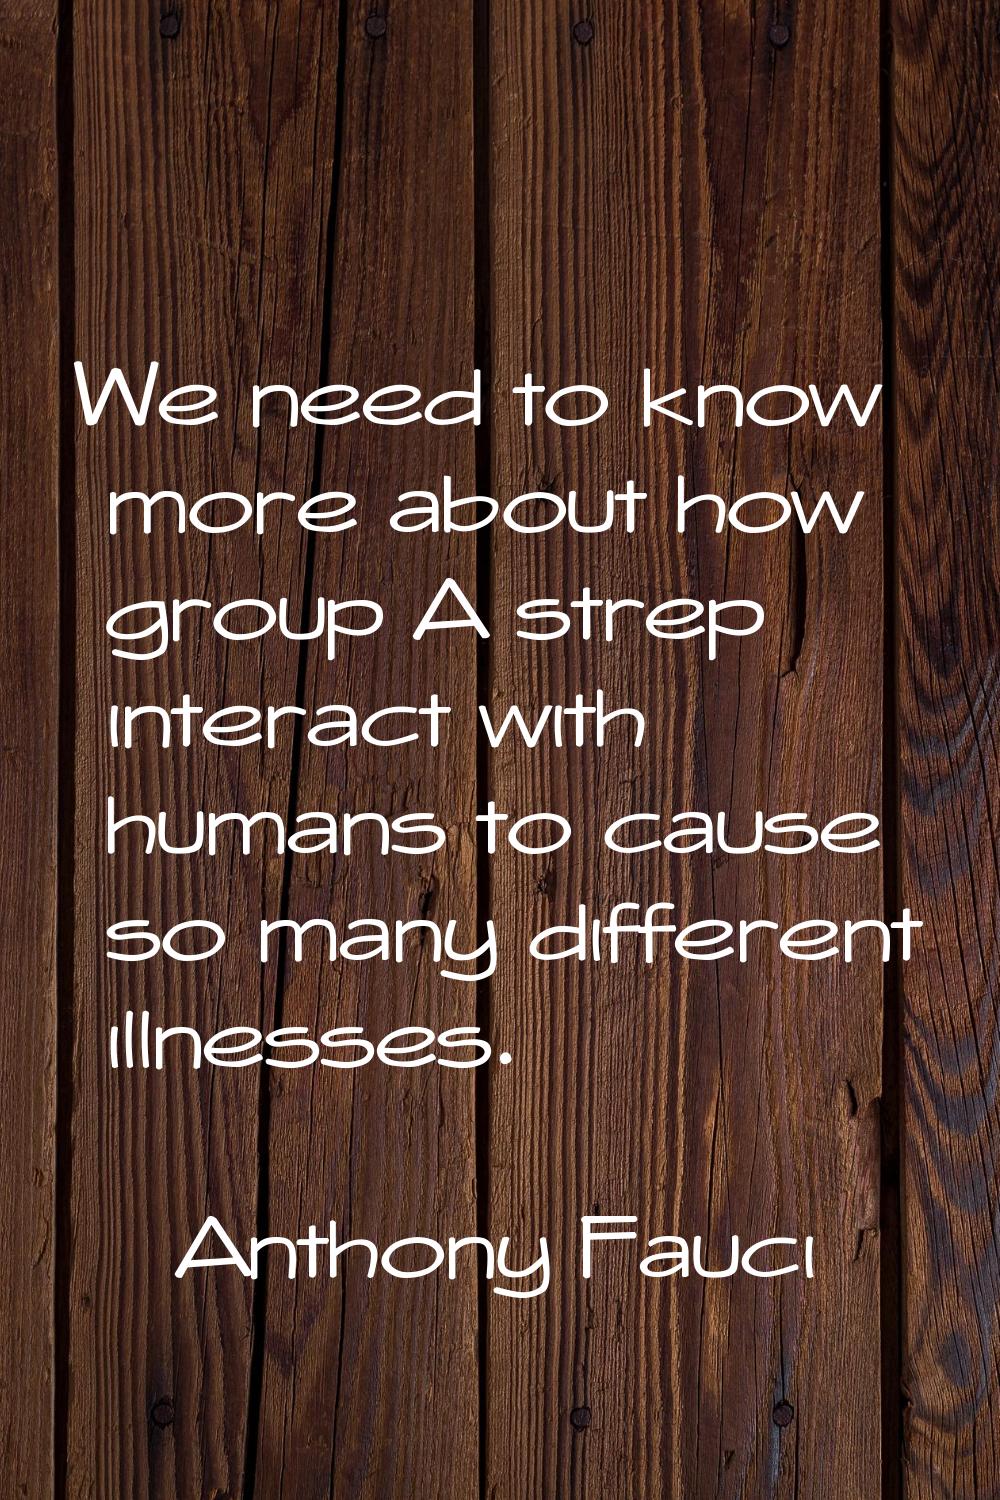 We need to know more about how group A strep interact with humans to cause so many different illnes